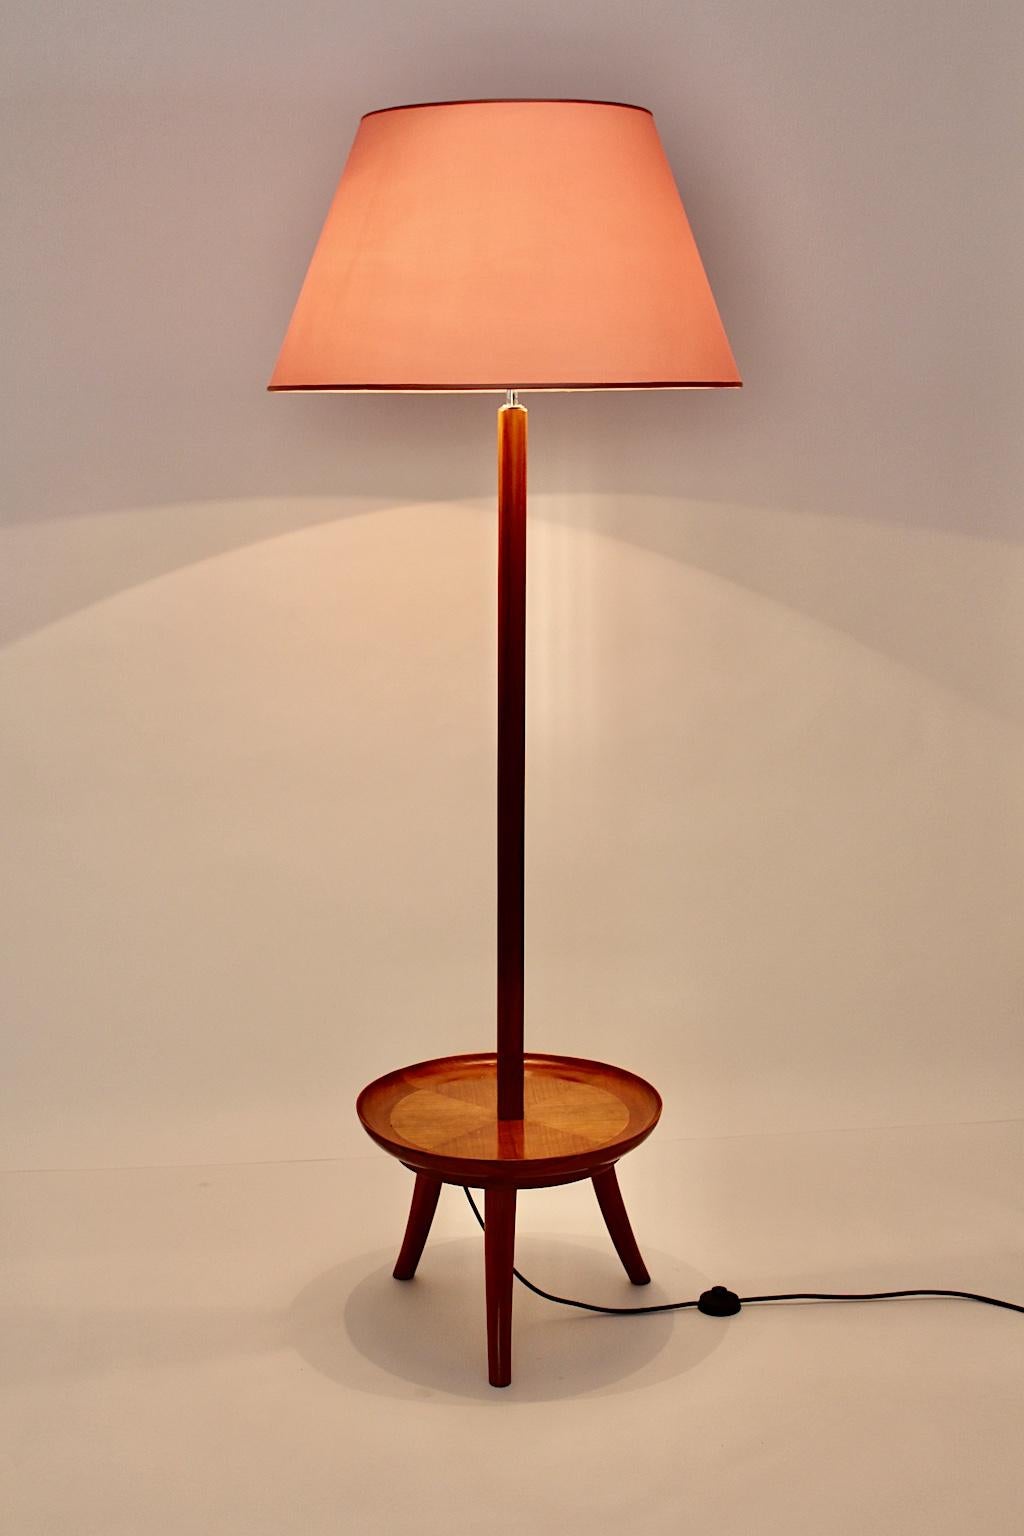 vintage floor lamp with table